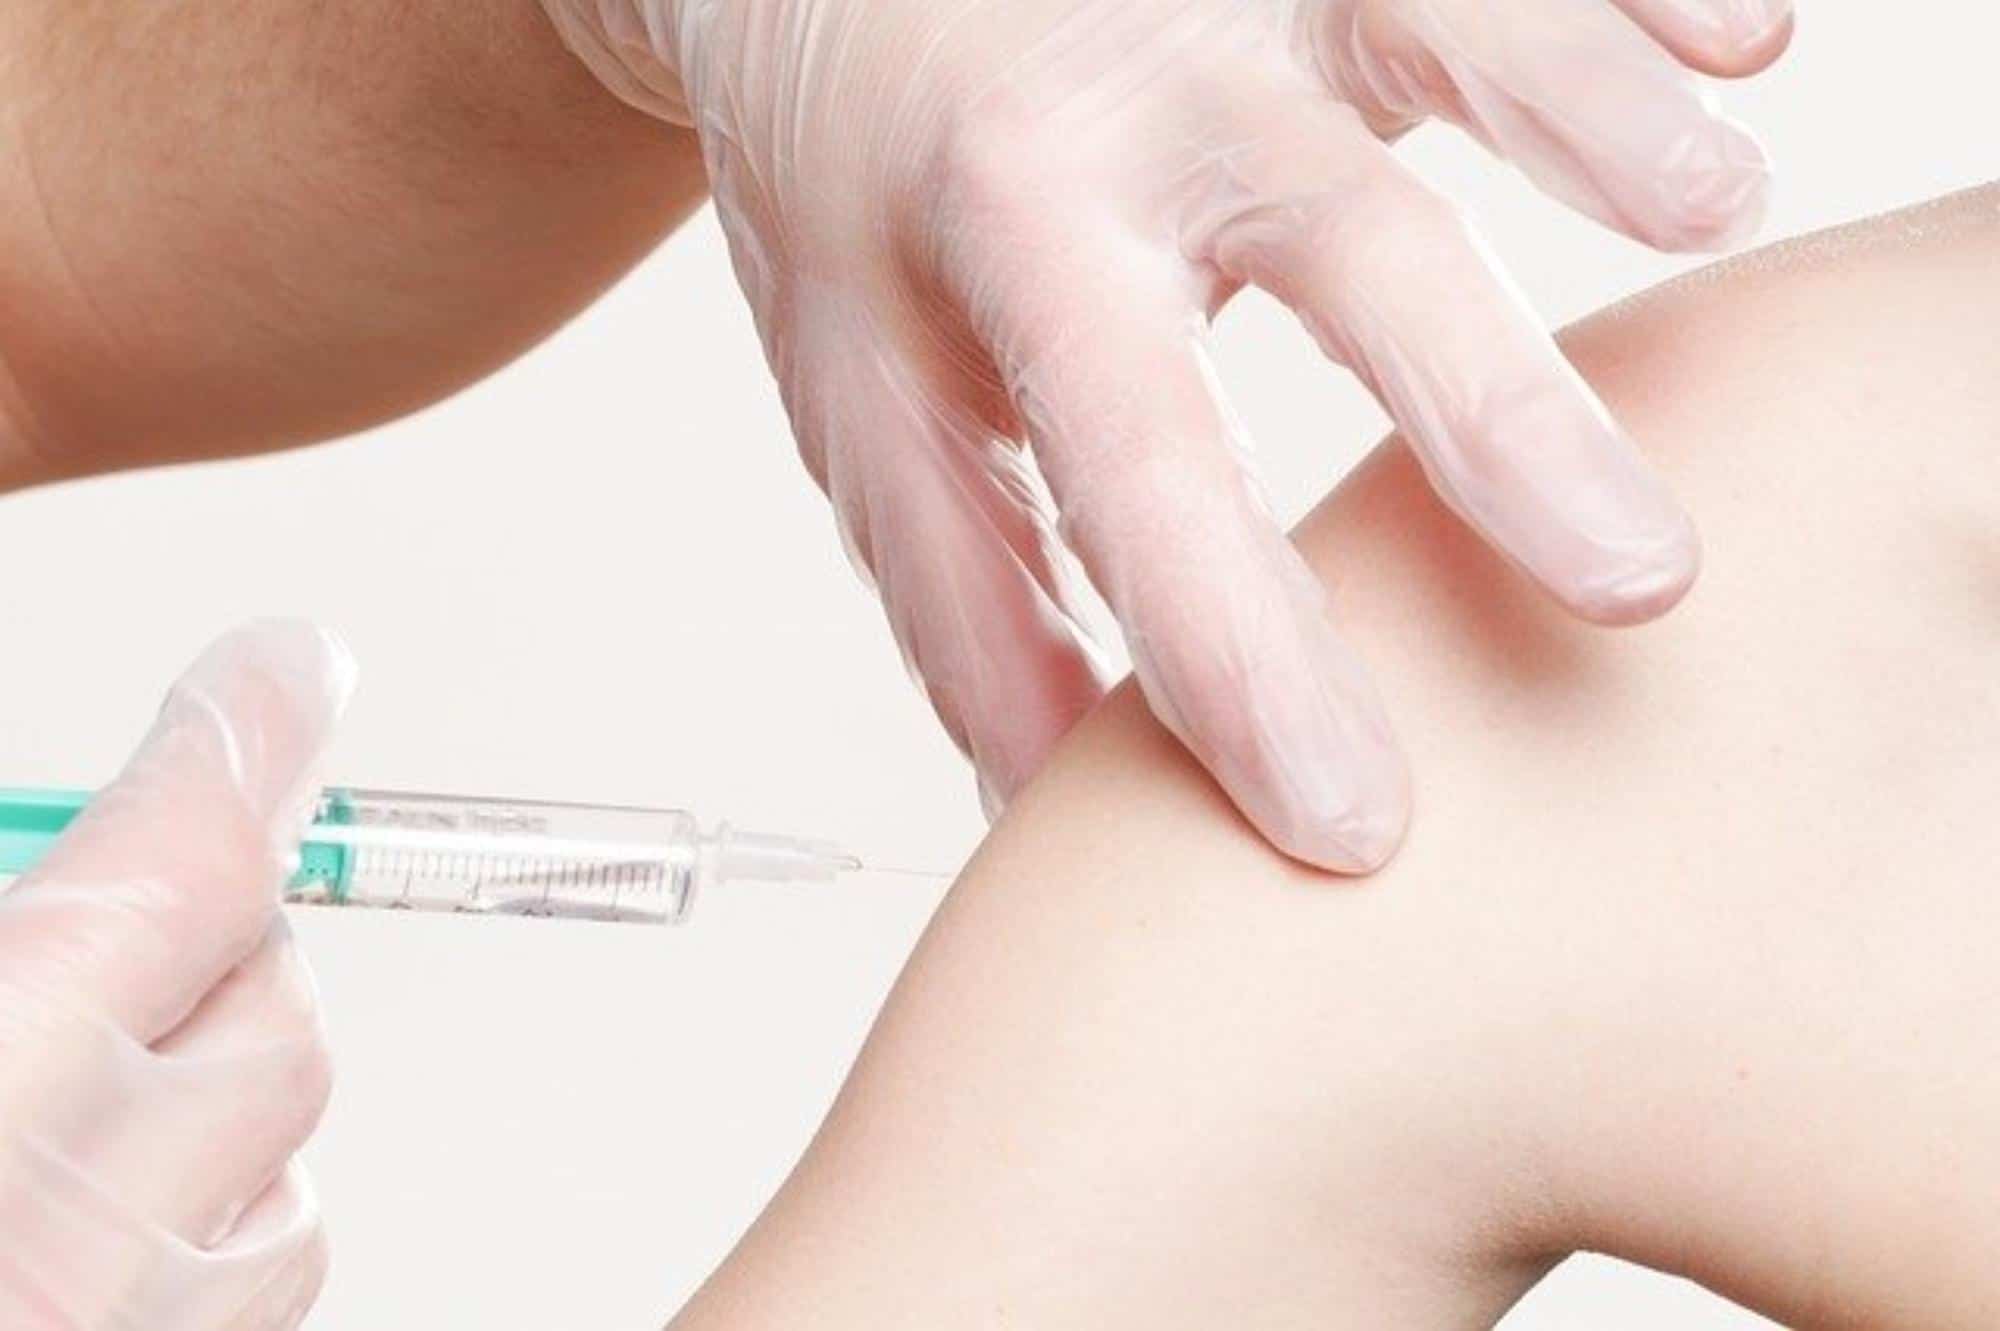 A flu shot is the best protection against the flu